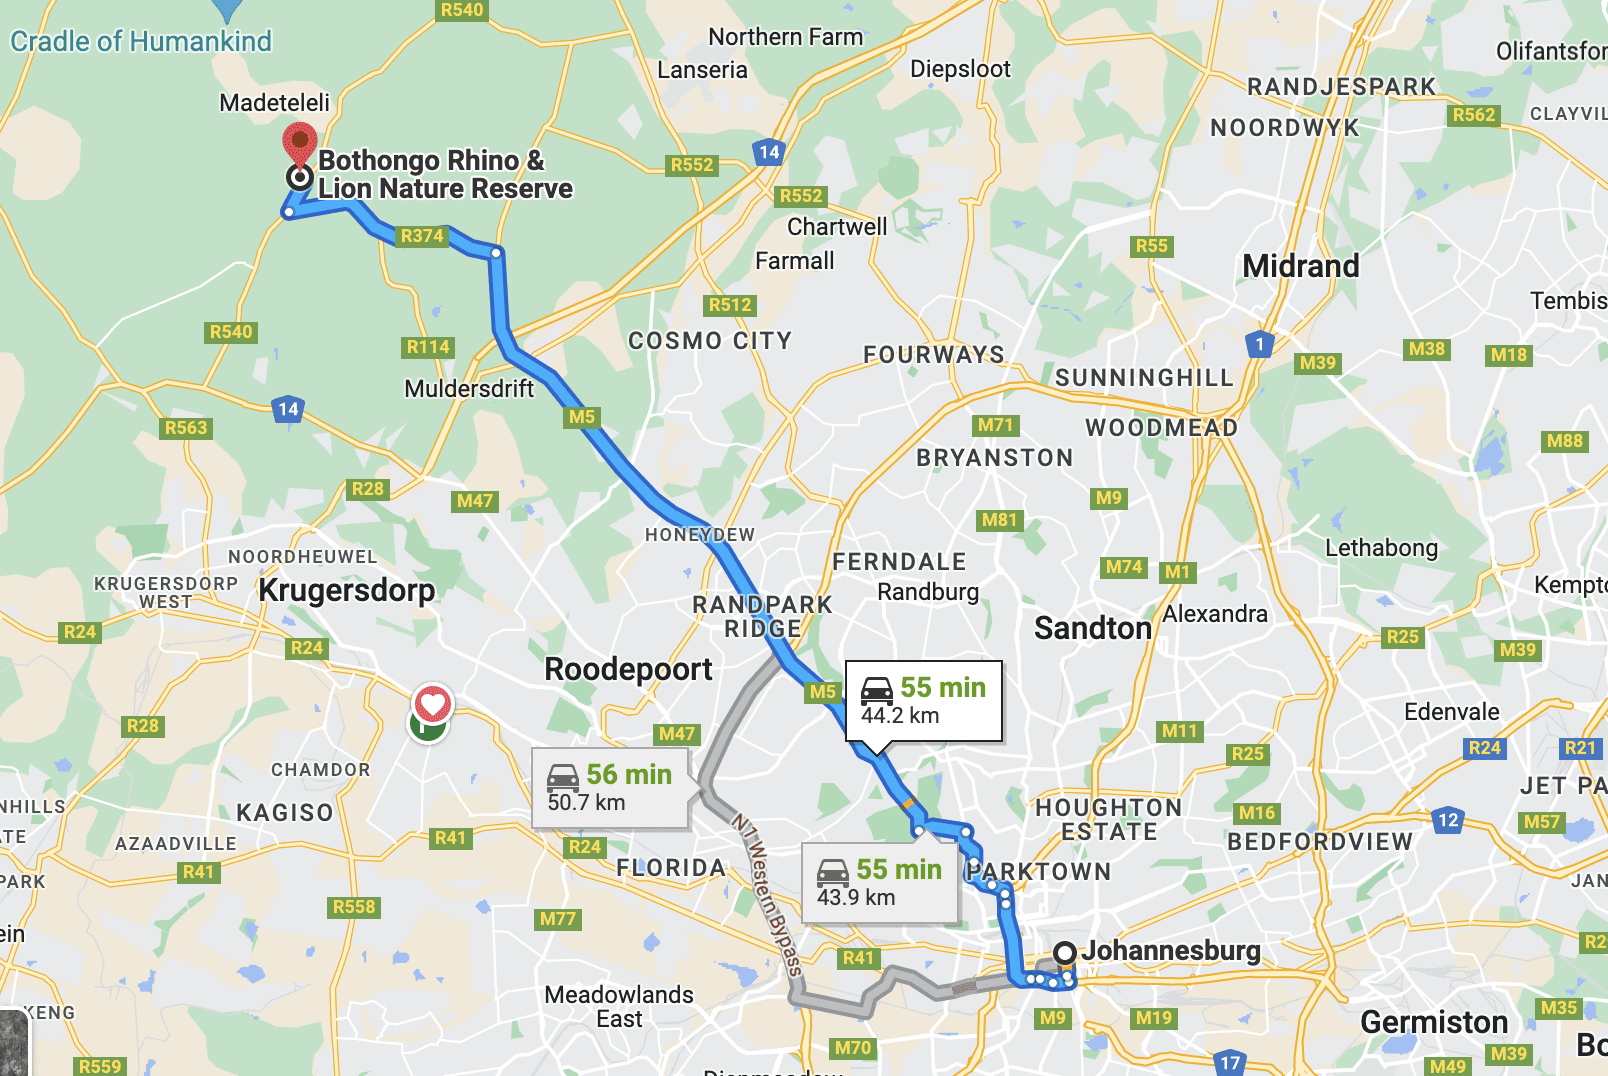 Google maps showing directions from Johannesburg to Bothongo rhino and lion nature Reserve